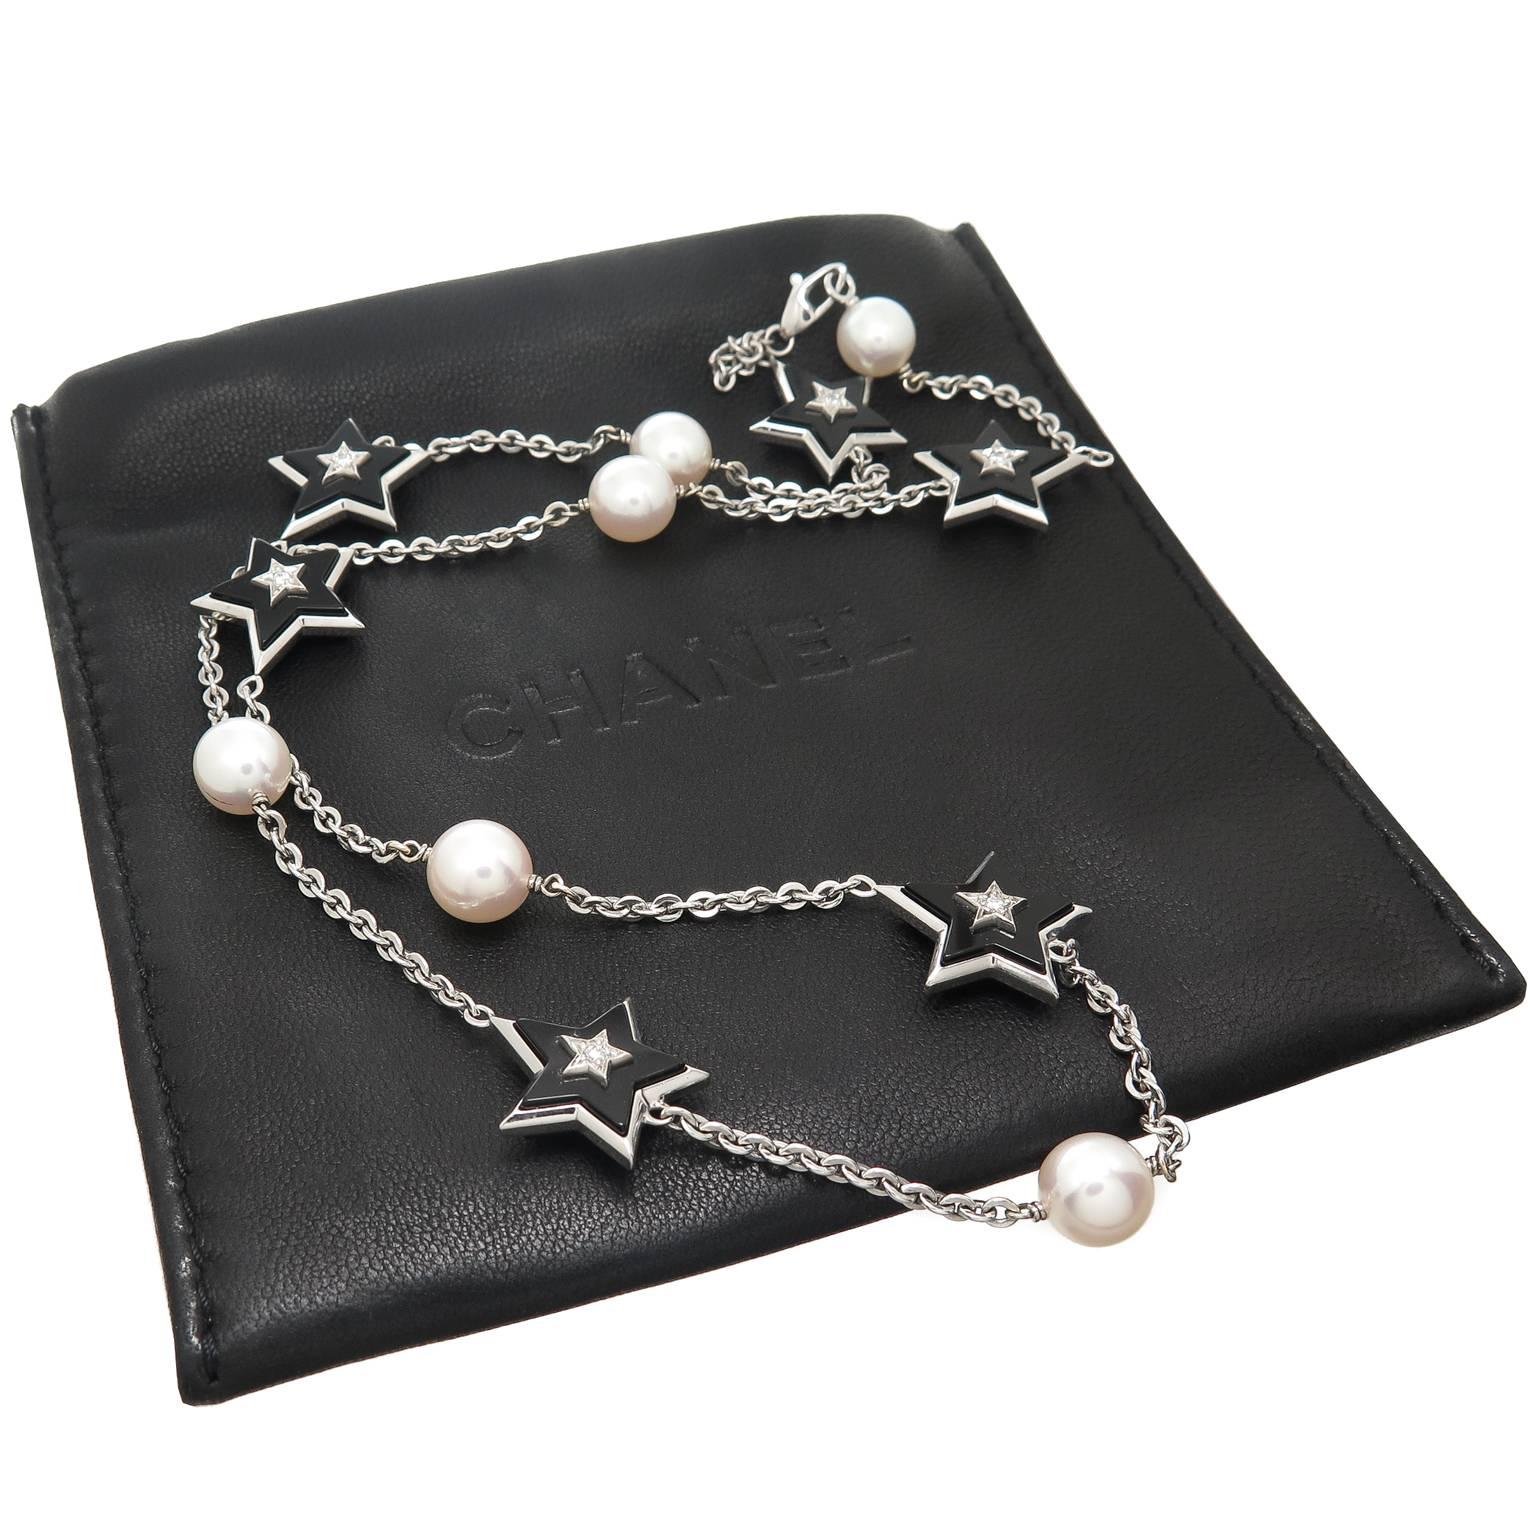 Circa 2005 Chanel 18K White Gold Necklace having double sided 5 point stars of Black Onyx measuring 1/2 inch and set with a Round Brilliant cut Diamond, further alternating with a fine luster 8 MM pearl. Total Necklace length 19 inch, signed and